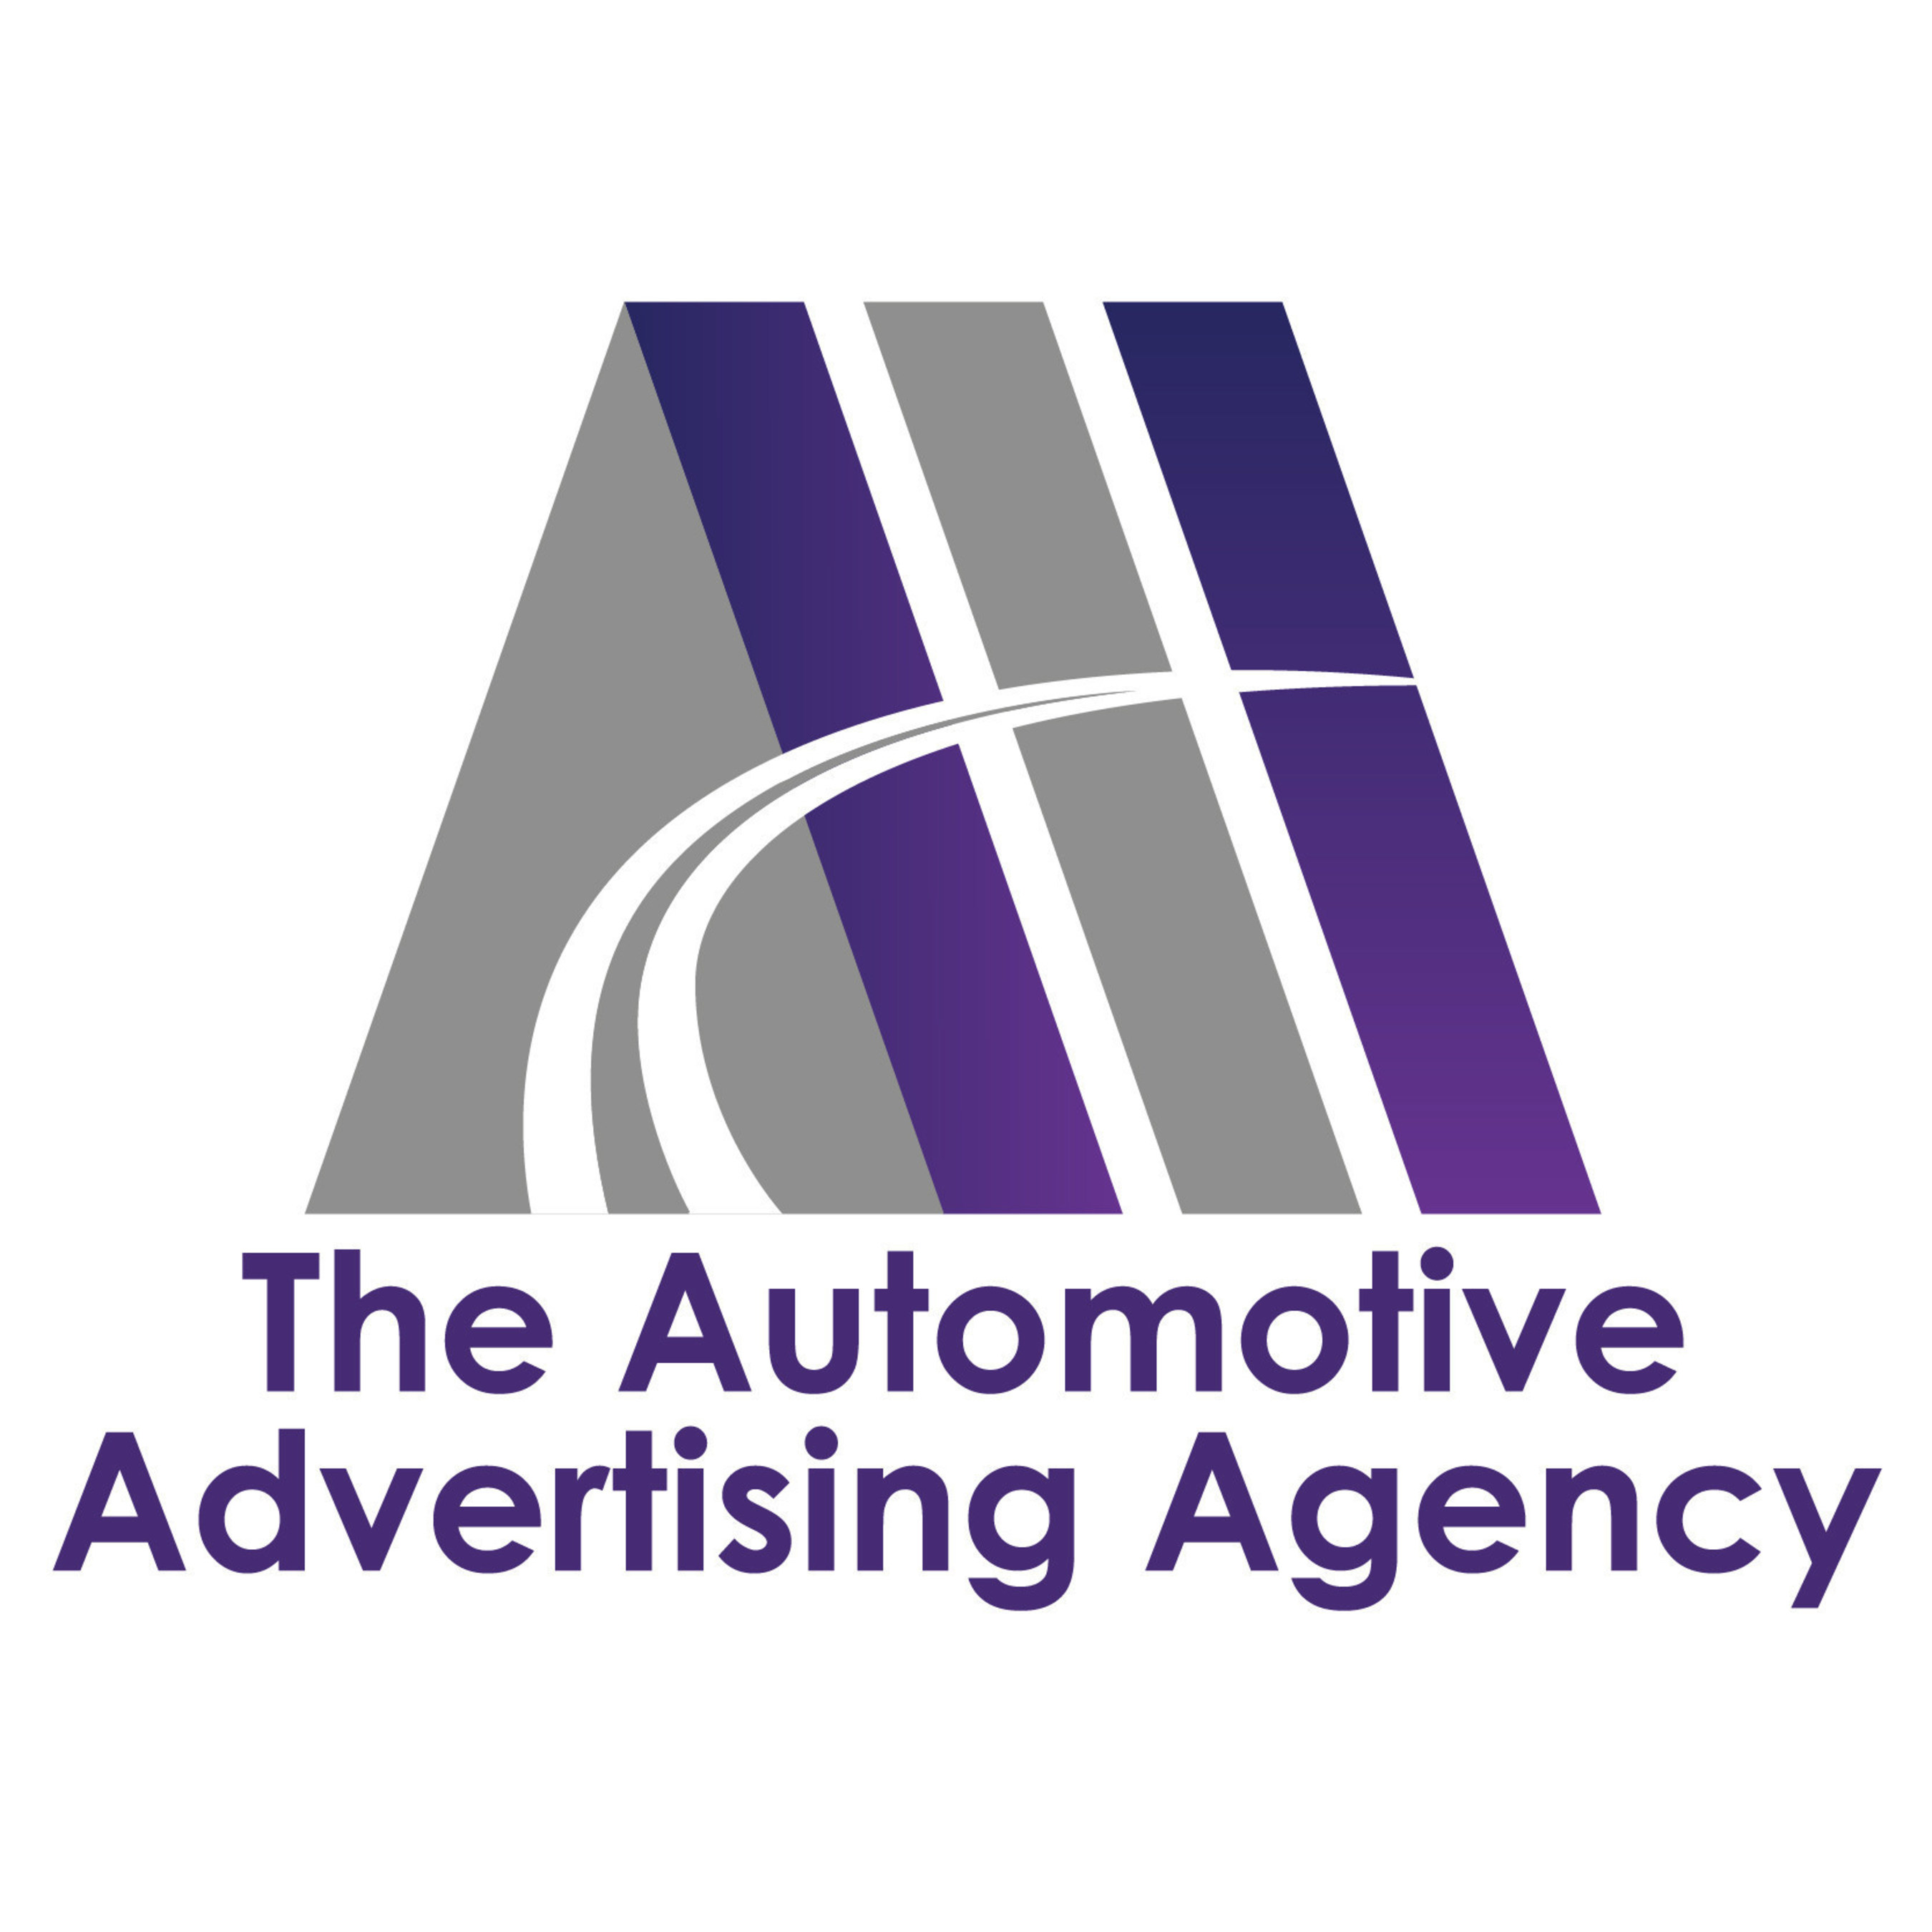 Logo for The Automotive Advertising Agency, a multi-cultural, full-service, Austin based creative advertising agency specializing in the automotive industry. The team at the agency represents over 133 years of combined experience in broadcast television, digital media, cable, radio, Spanish language media, internet marketing, brand development, public relations and advertising.